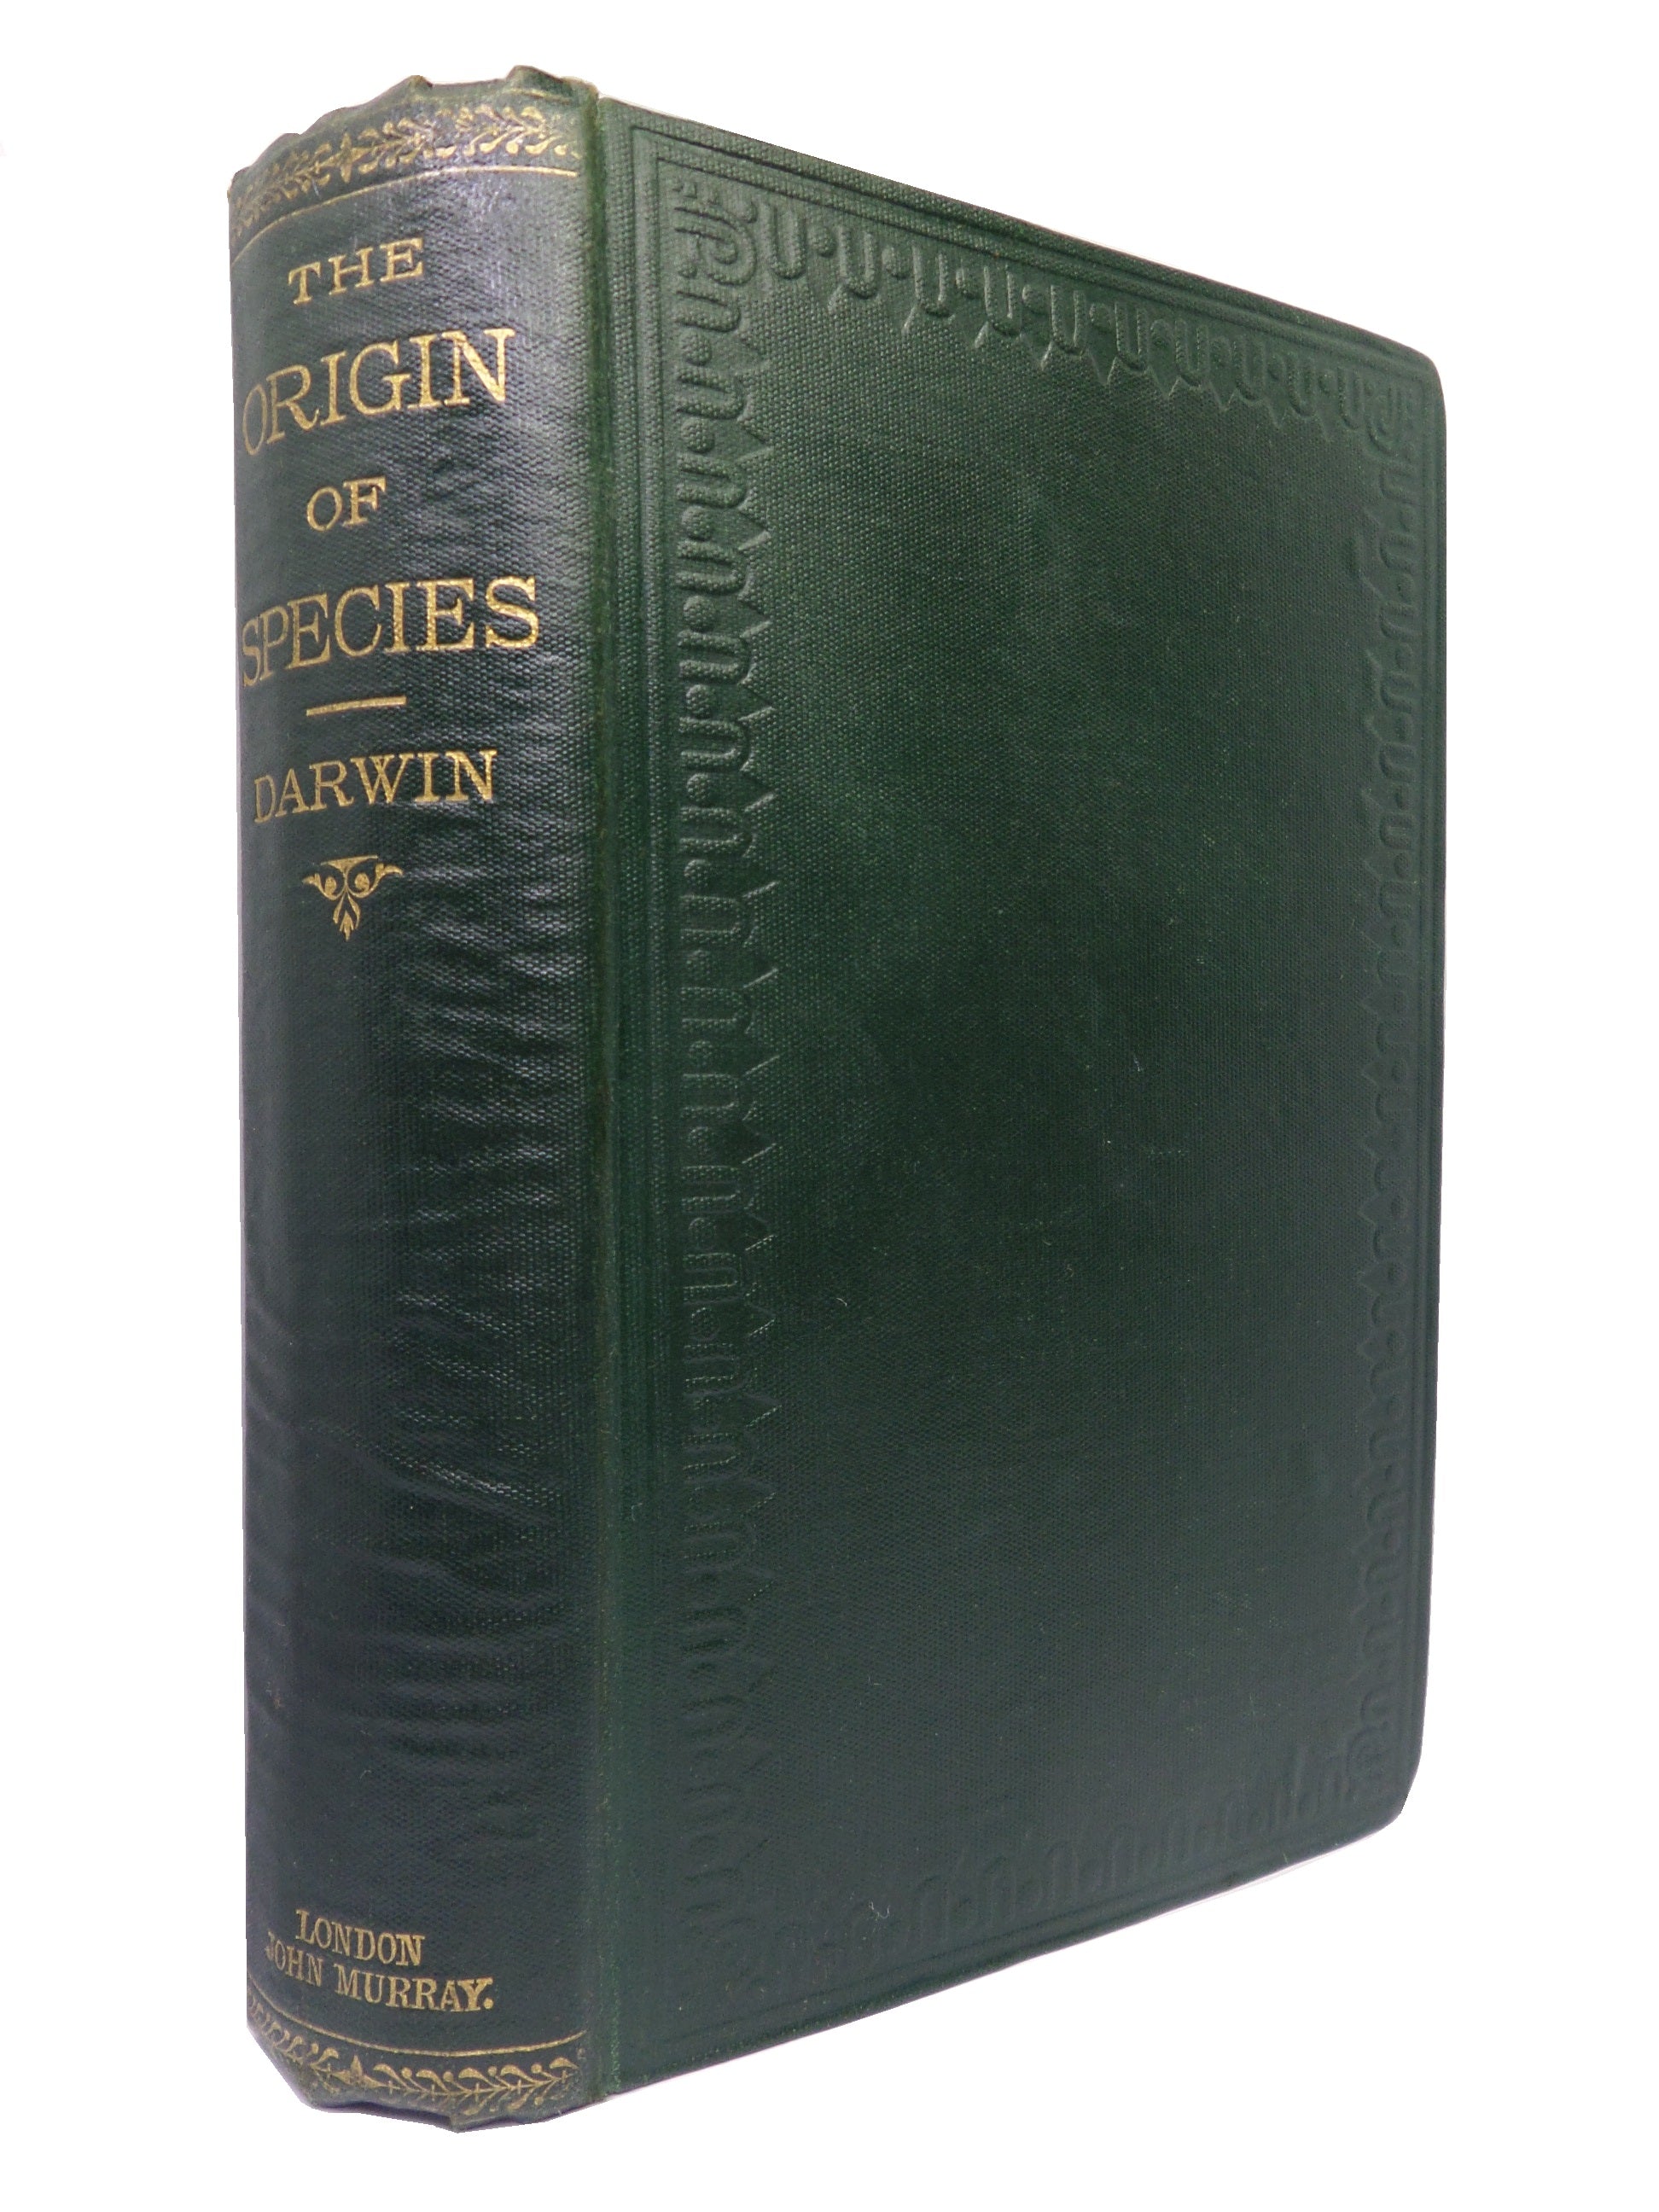 THE ORIGIN OF SPECIES BY MEANS OF NATURAL SELECTION BY CHARLES DARWIN 1878